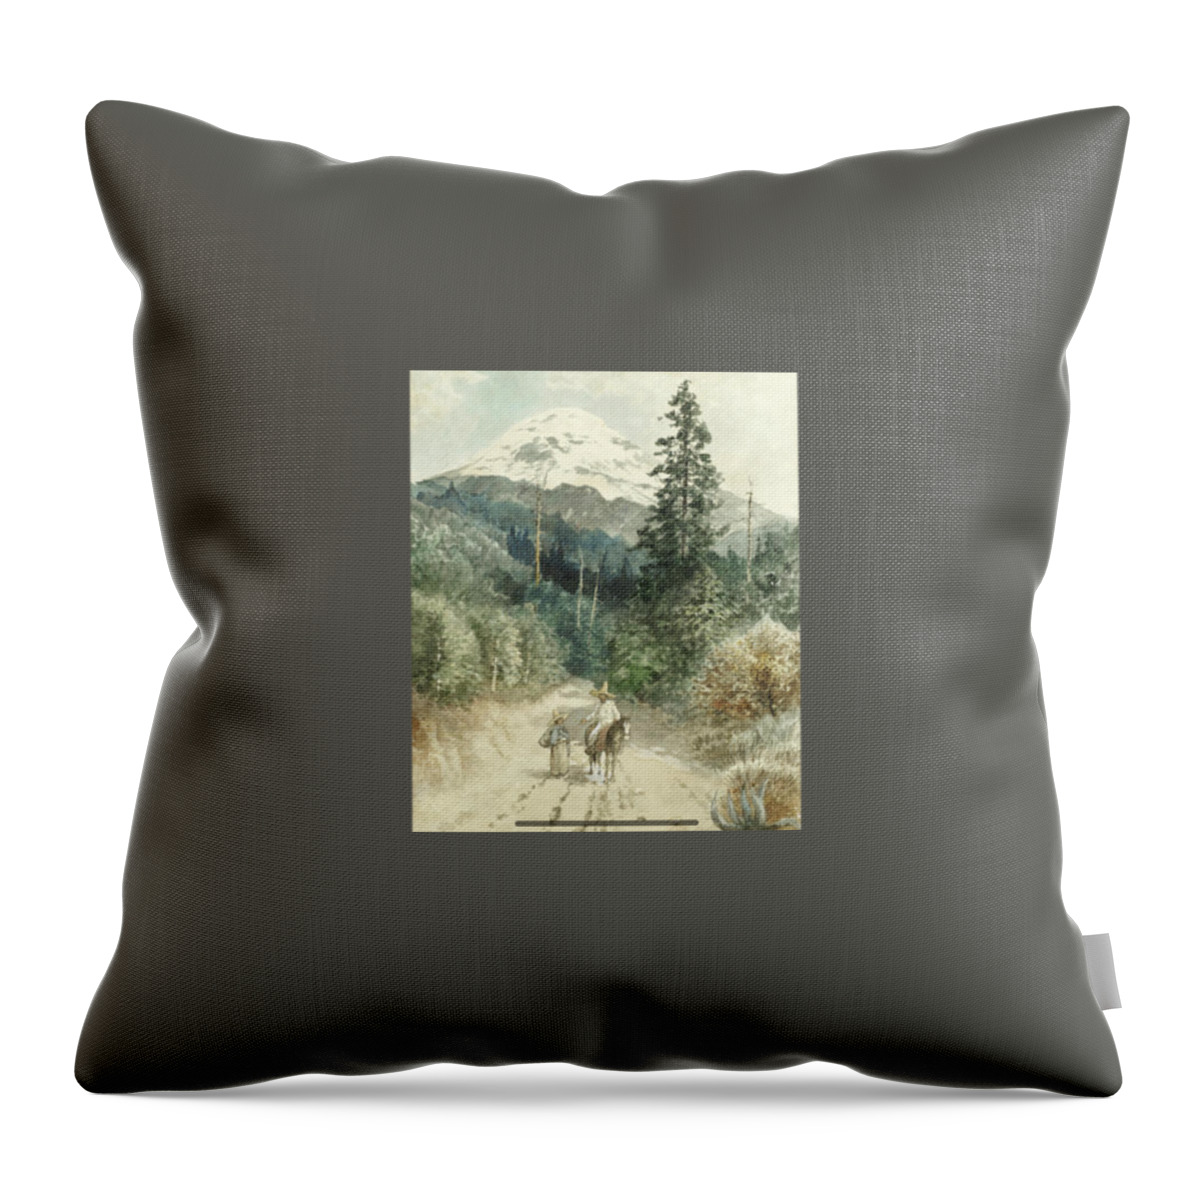 August LÖhr (german Throw Pillow featuring the painting A view of Popocatepetl #1 by MotionAge Designs